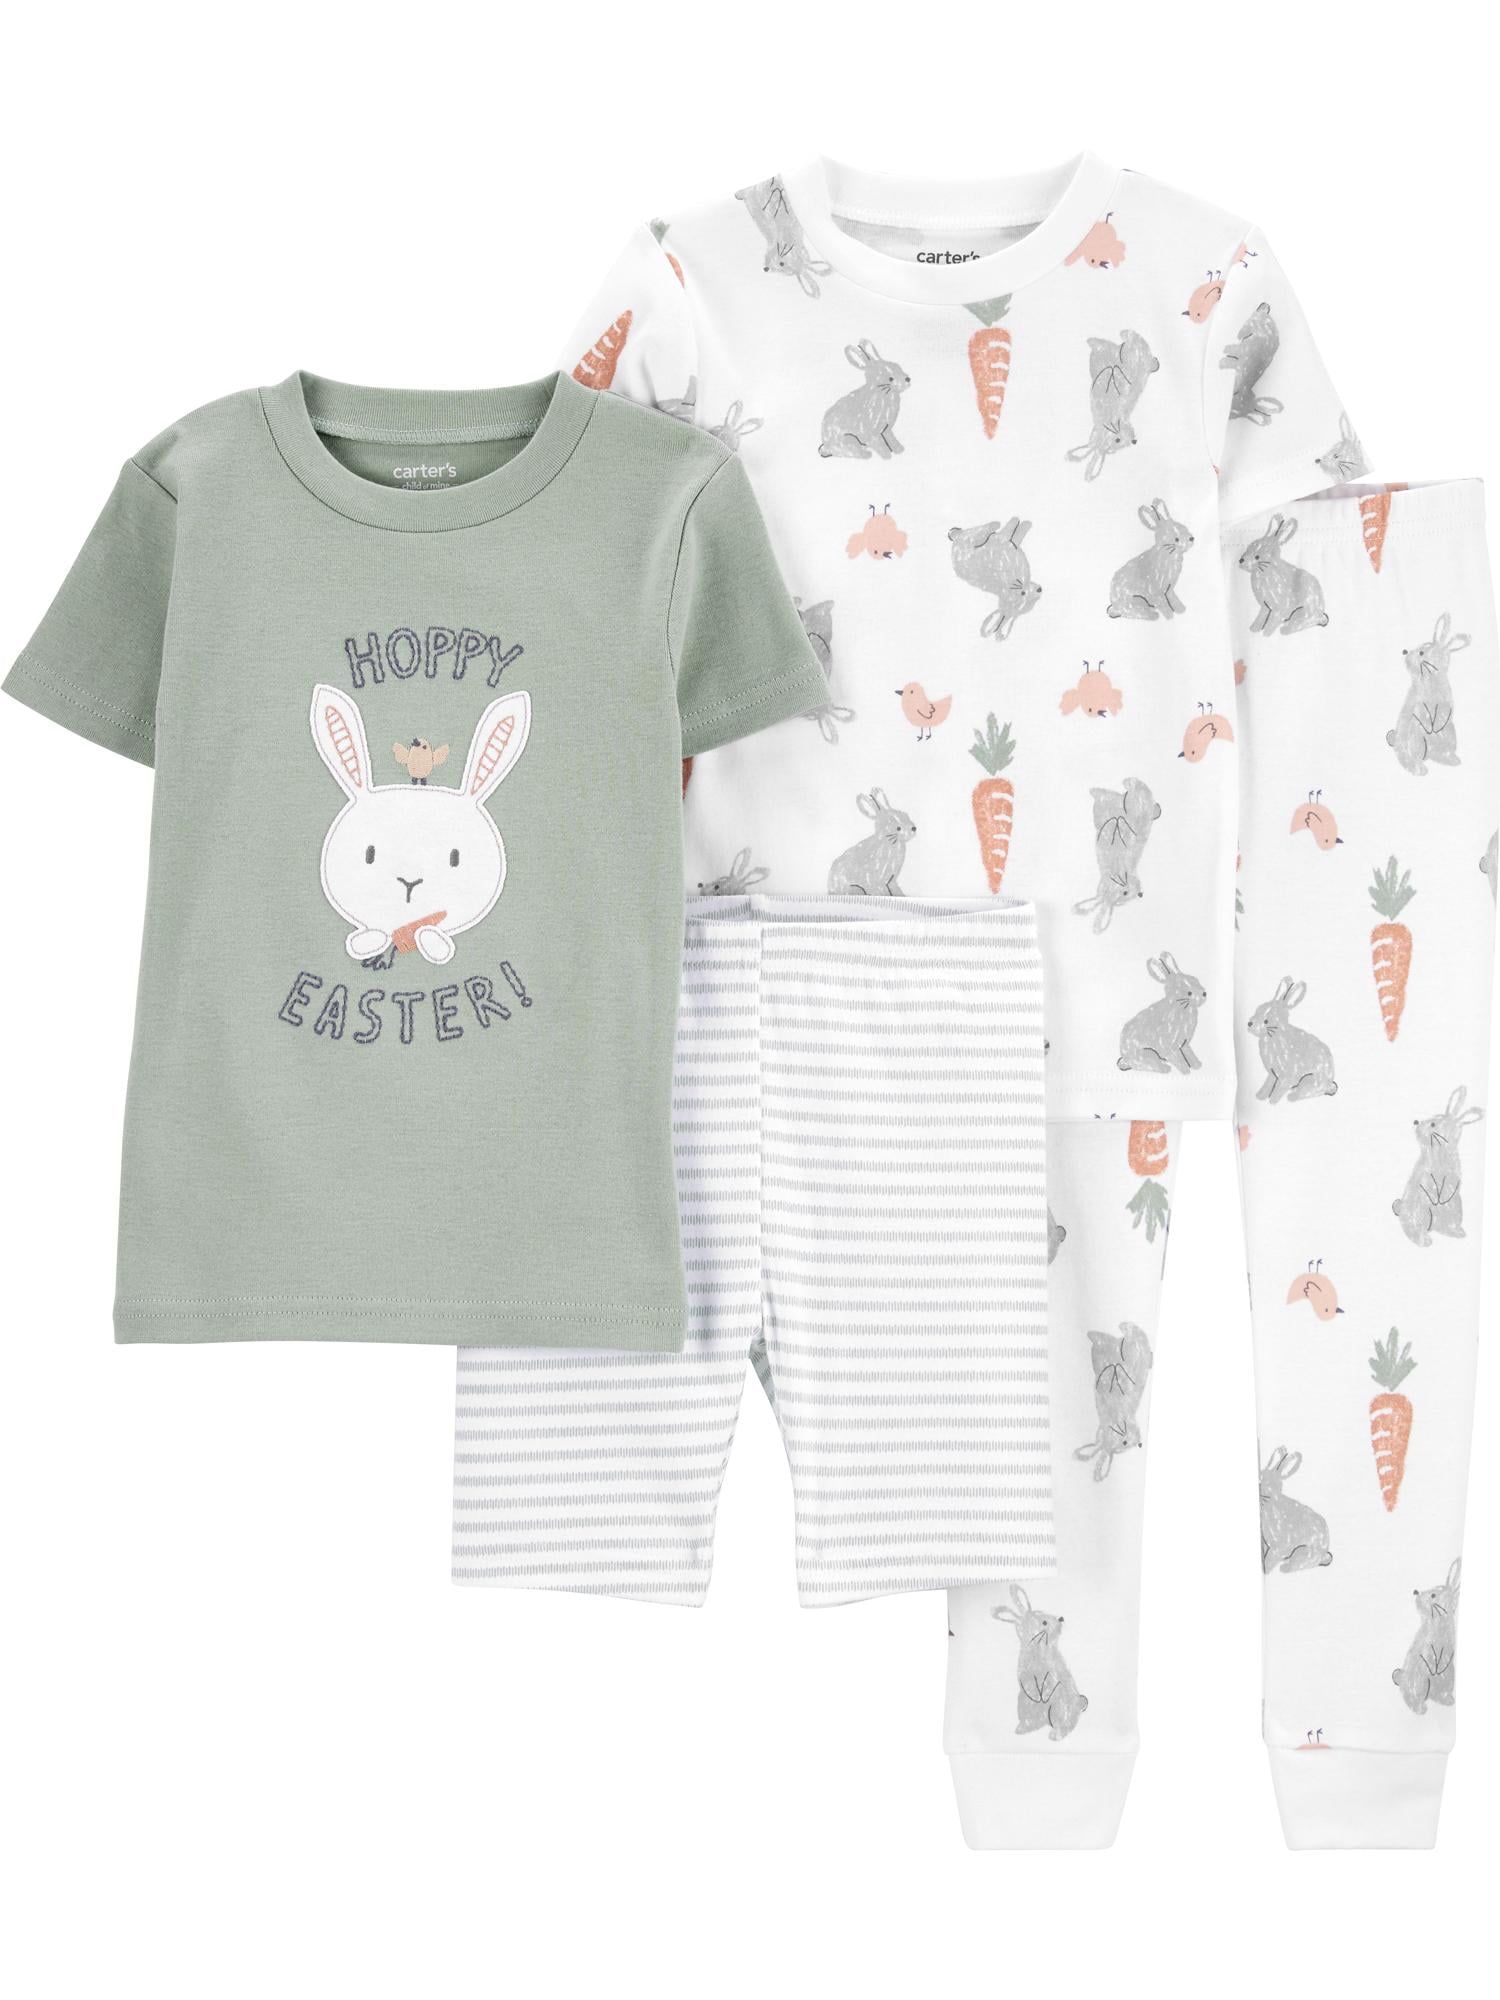 Carter's Child of Mine Baby and Toddler Unisex Easter Pajama Set, 4-Piece, Sizes 12M-5T